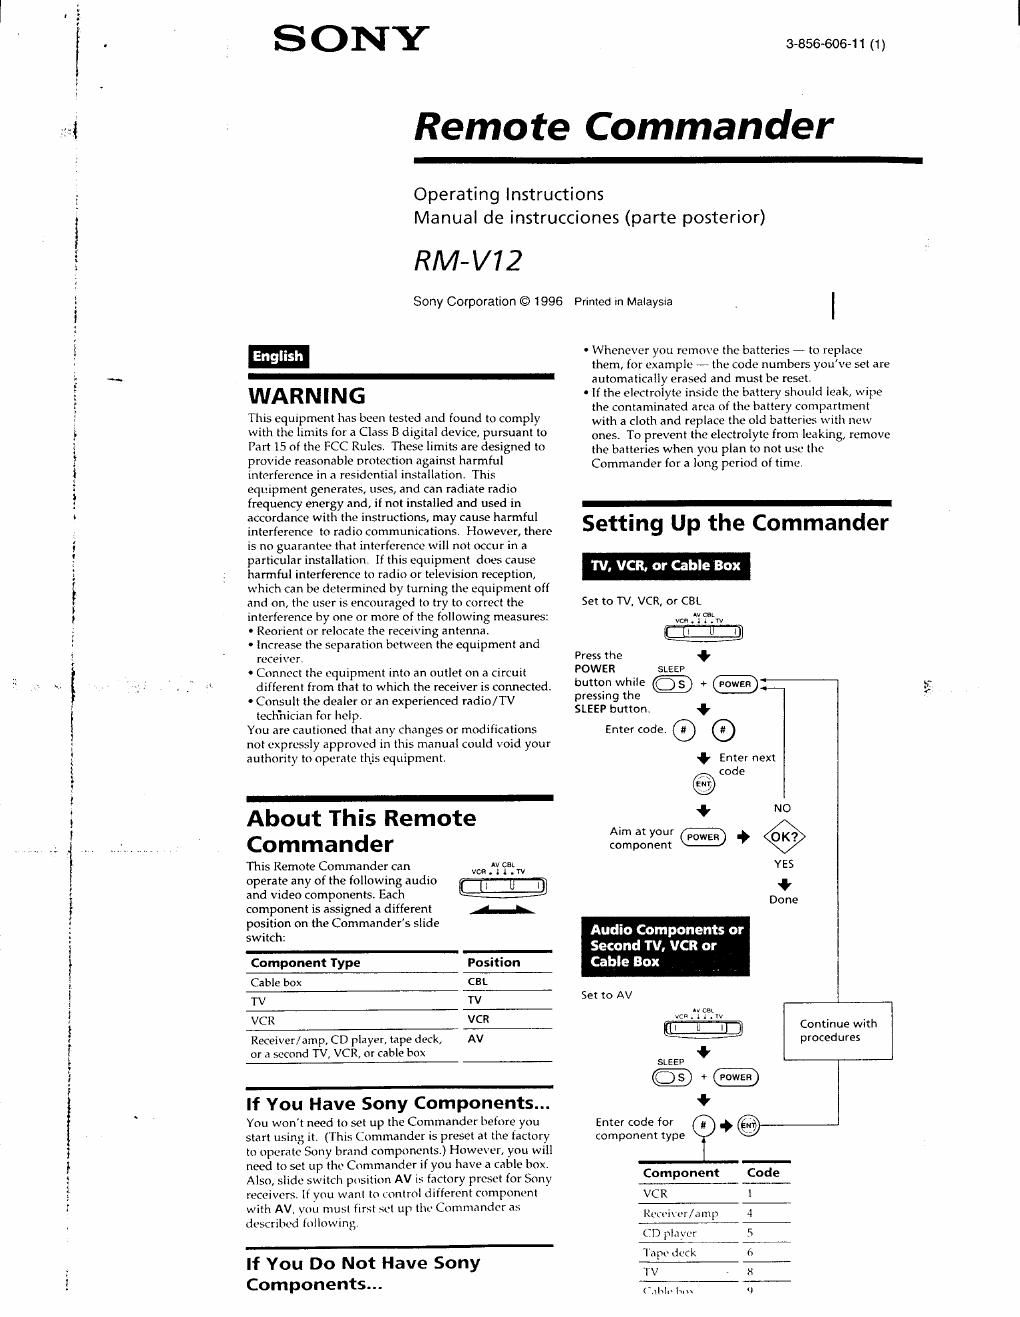 sony rm v 12 owners manual